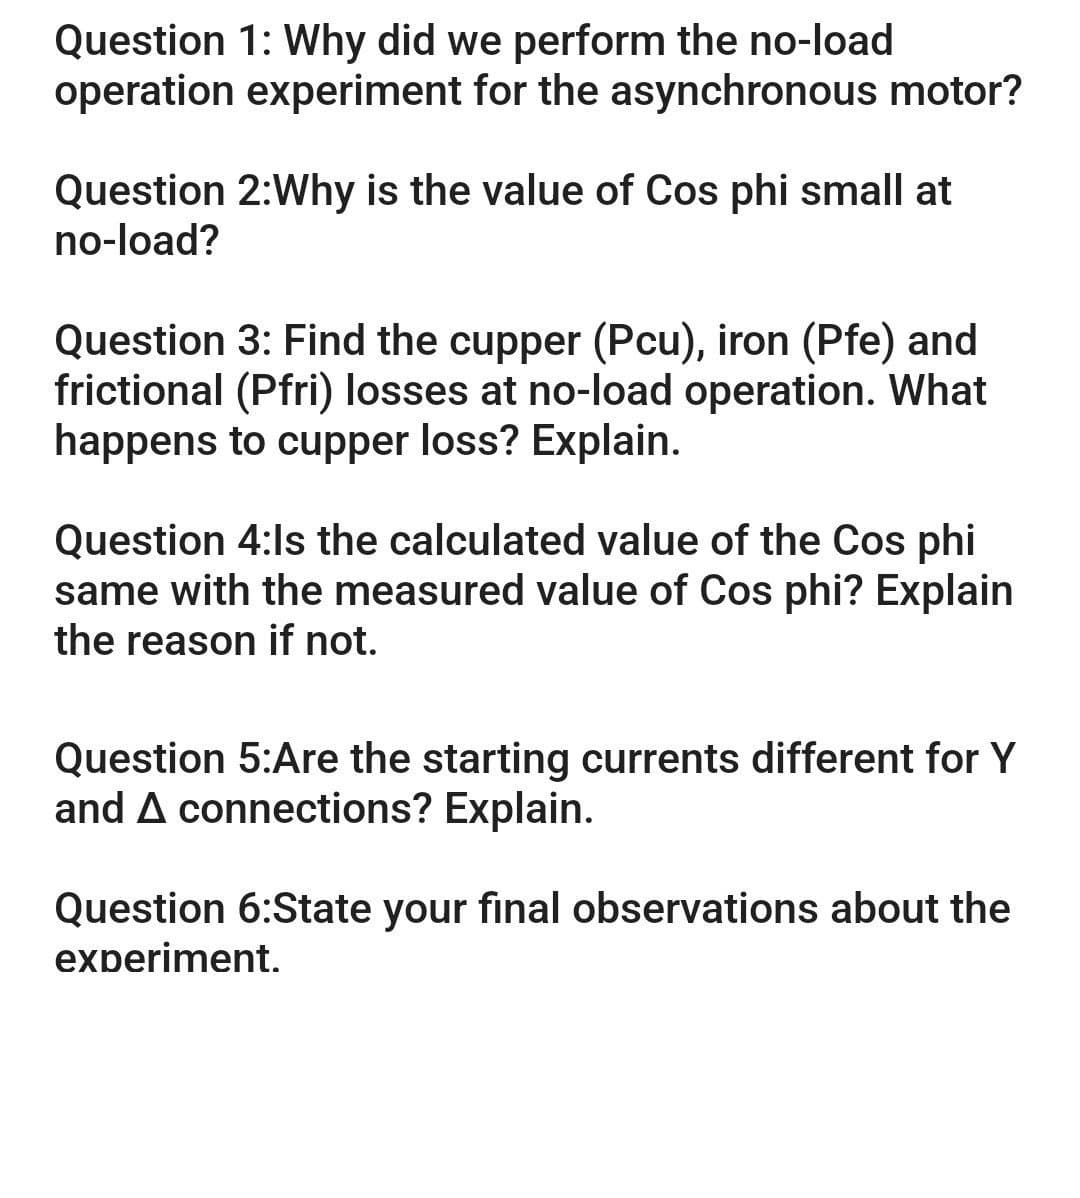 Question 1: Why did we perform the no-load
operation experiment for the asynchronous motor?
Question 2:Why is the value of Cos phi small at
no-load?
Question 3: Find the cupper (Pcu), iron (Pfe) and
frictional (Pfri) losses at no-load operation. What
happens to cupper loss? Explain.
Question 4:Is the calculated value of the Cos phi
same with the measured value of Cos phi? Explain
the reason if not.
Question 5:Are the starting currents different for Y
and A connections? Explain.
Question 6:State your final observations about the
experiment.
